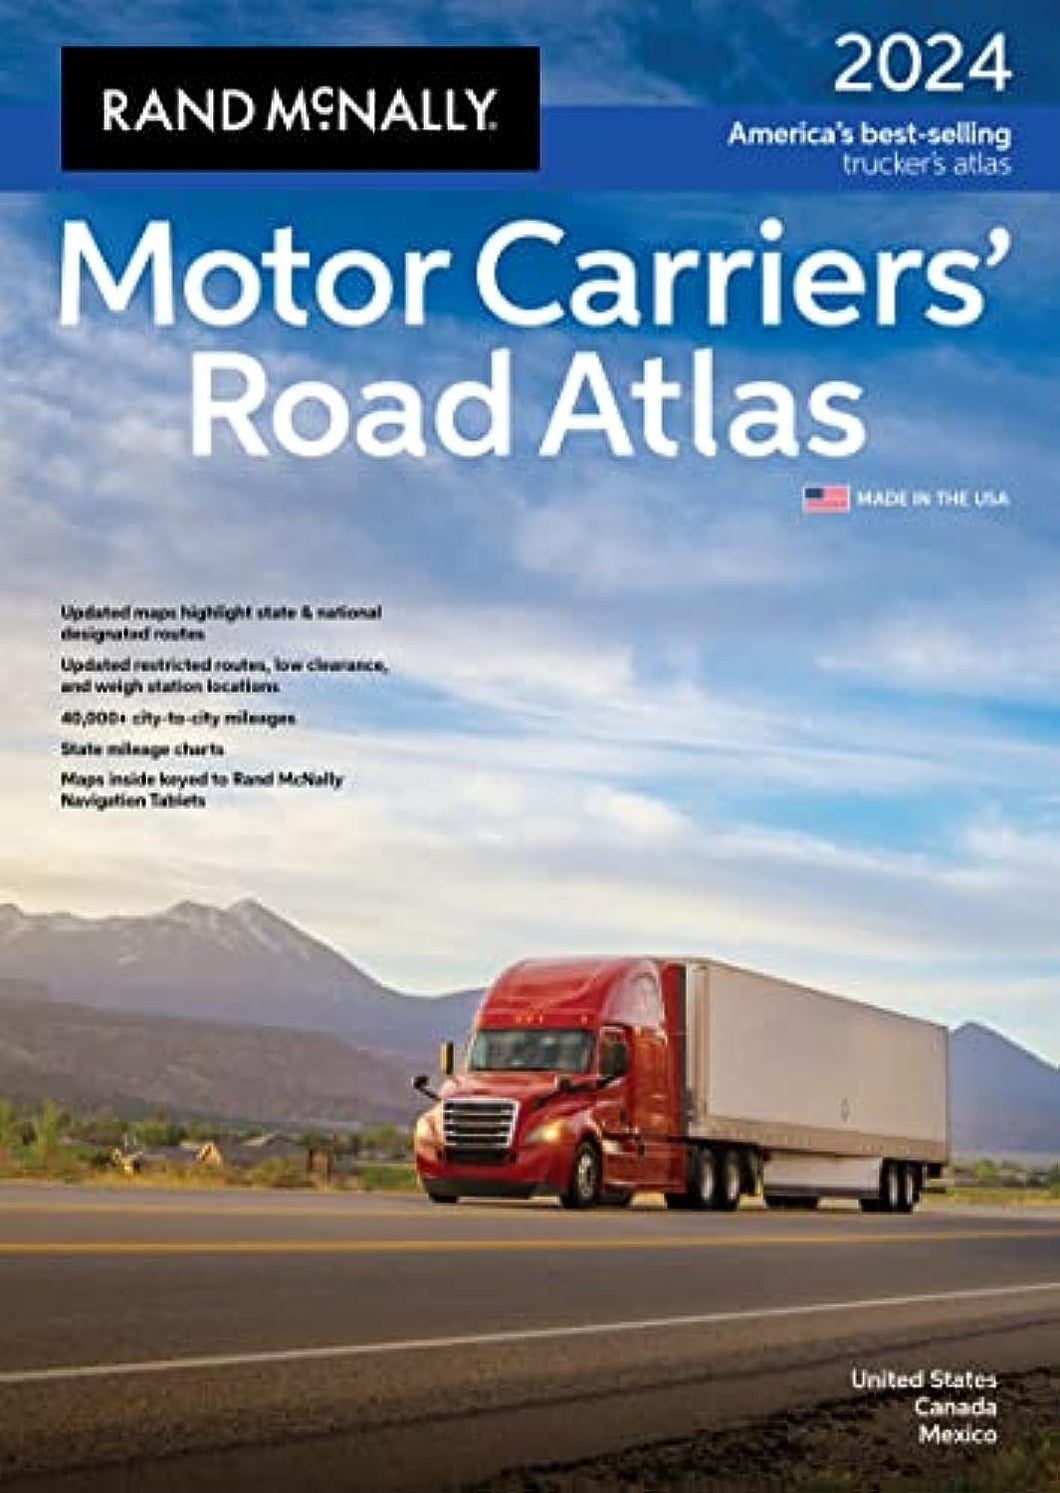 Rand McNally 2024 Motor Carriers' Road Atlas (The Rand McNally Motor Carriers' Road Atlas)